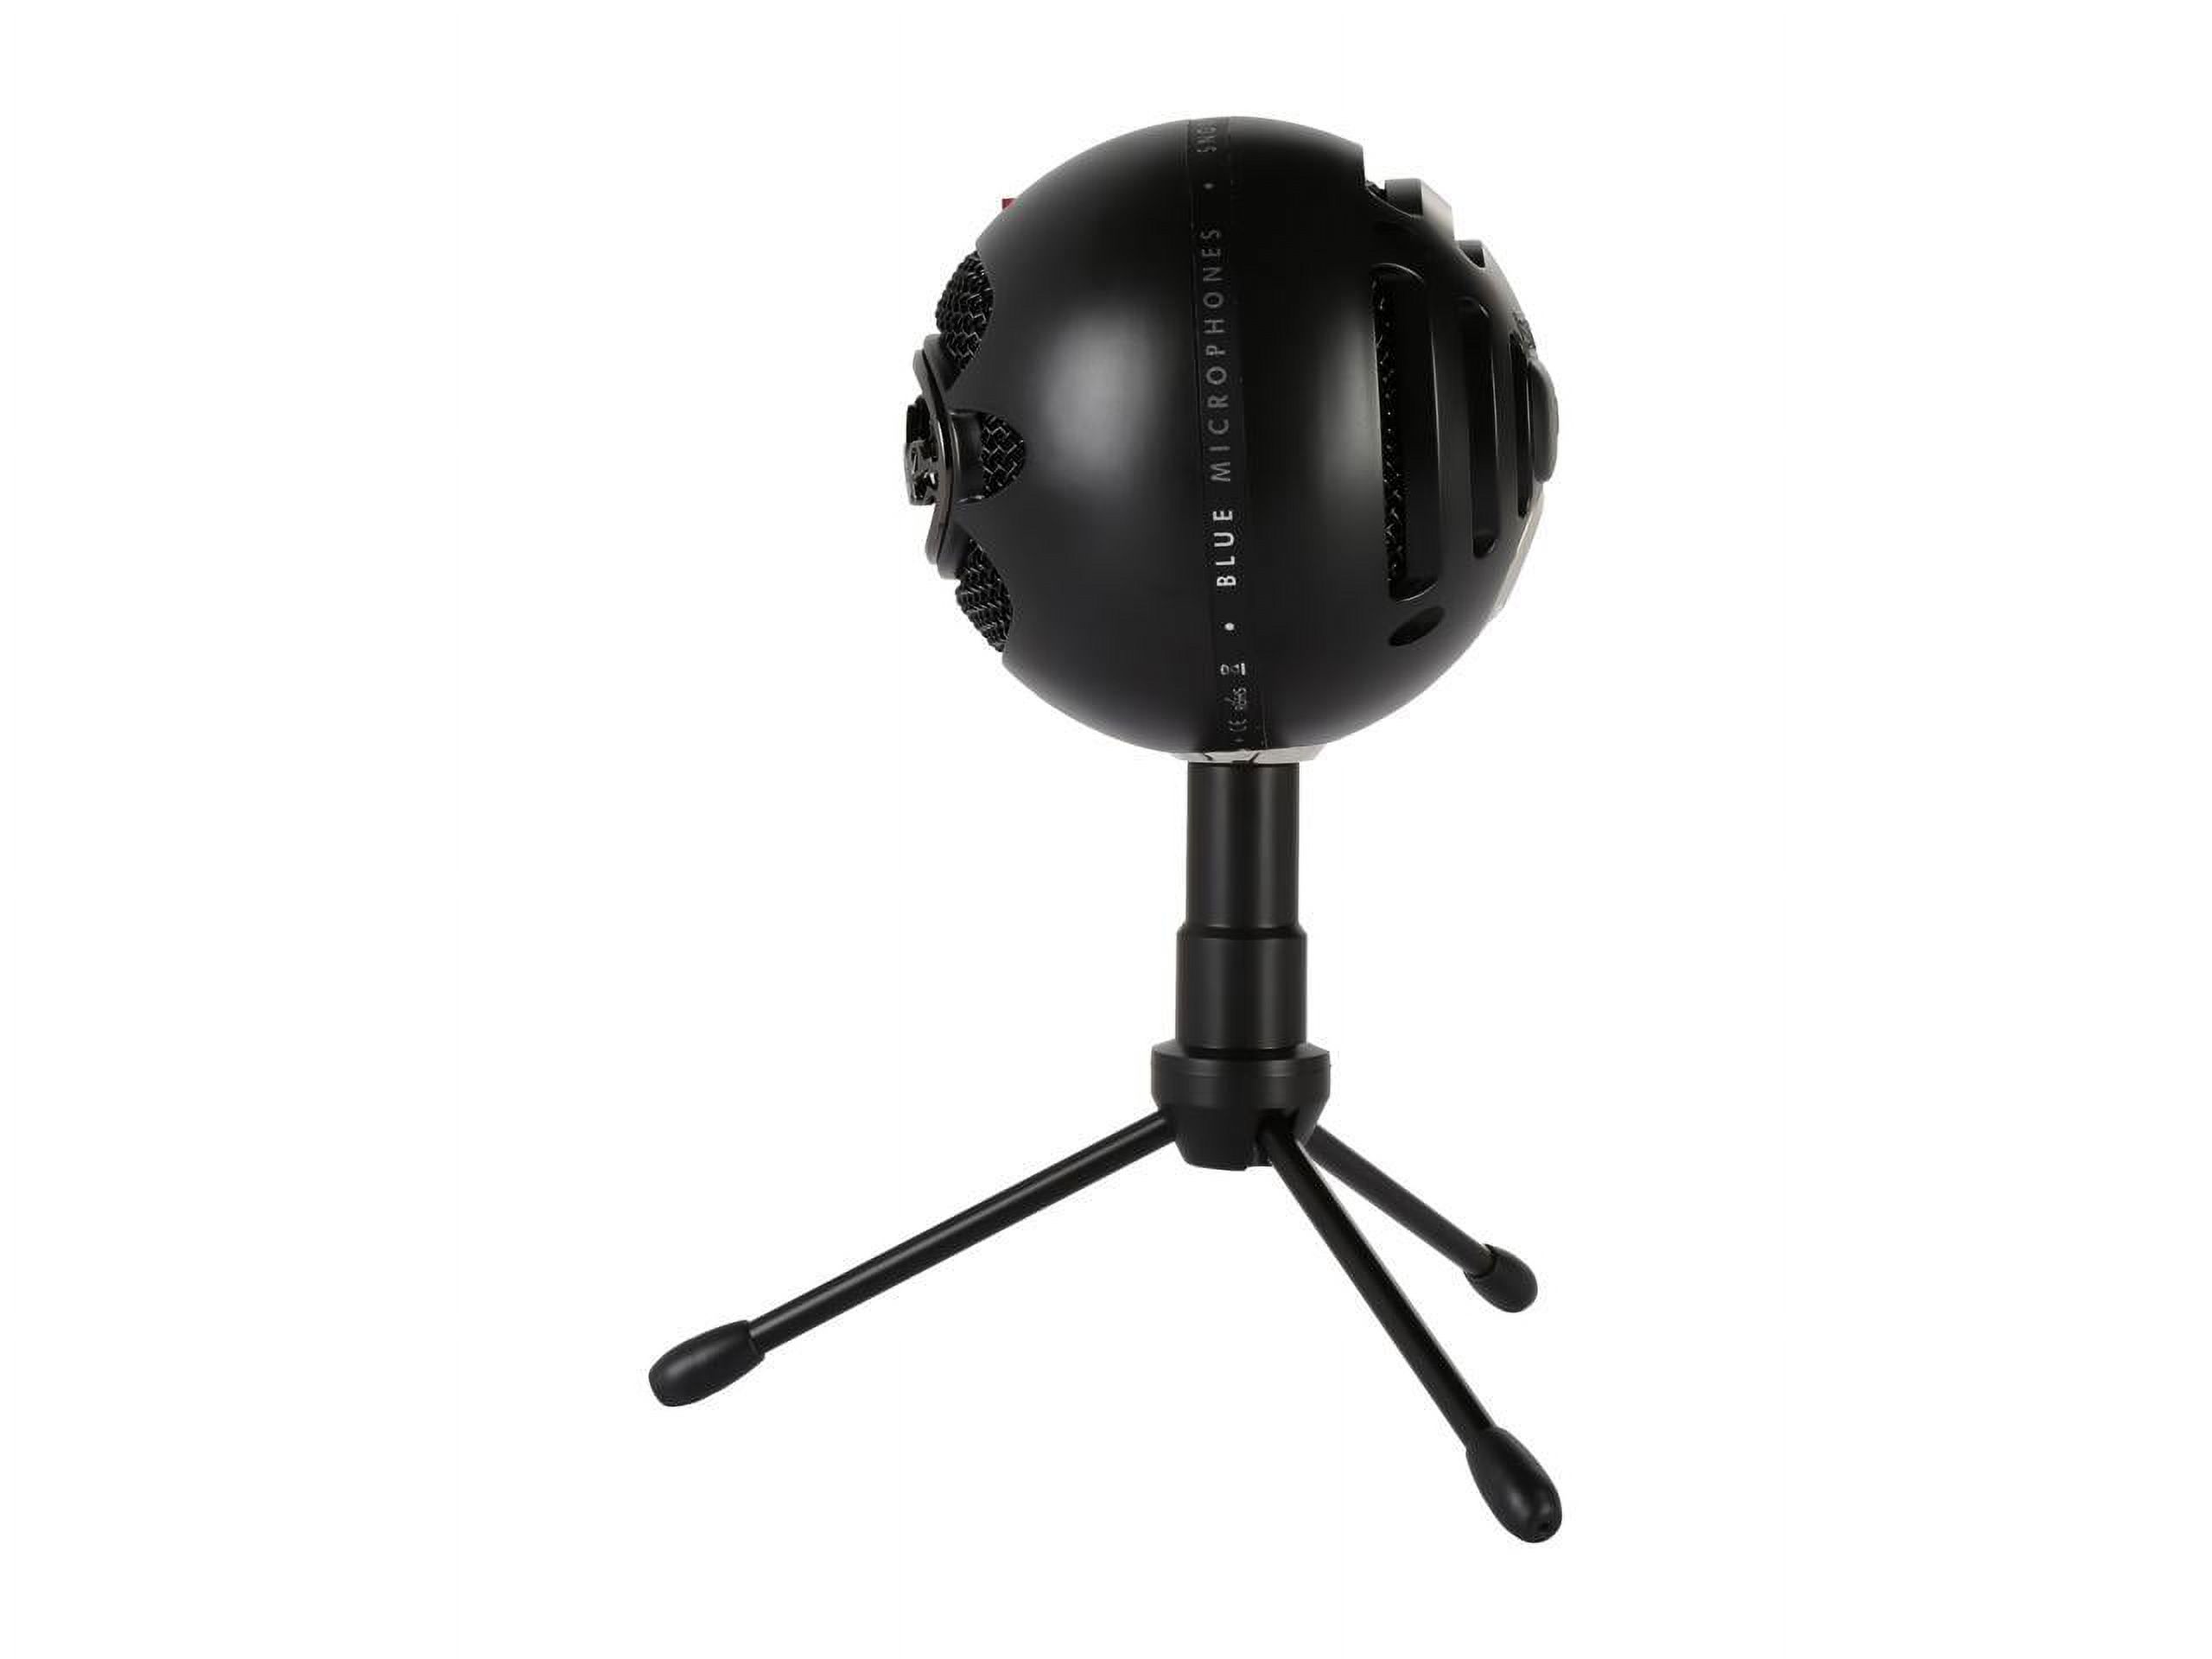 Blue Snowball iCE USB Microphone for PC, Mac, Gaming, Recording, Streaming, Podcasting, with Cardioid Condenser Mic Capsule, Adjustable Desktop Stand and USB cable, Plug 'n Play – Black - image 5 of 6